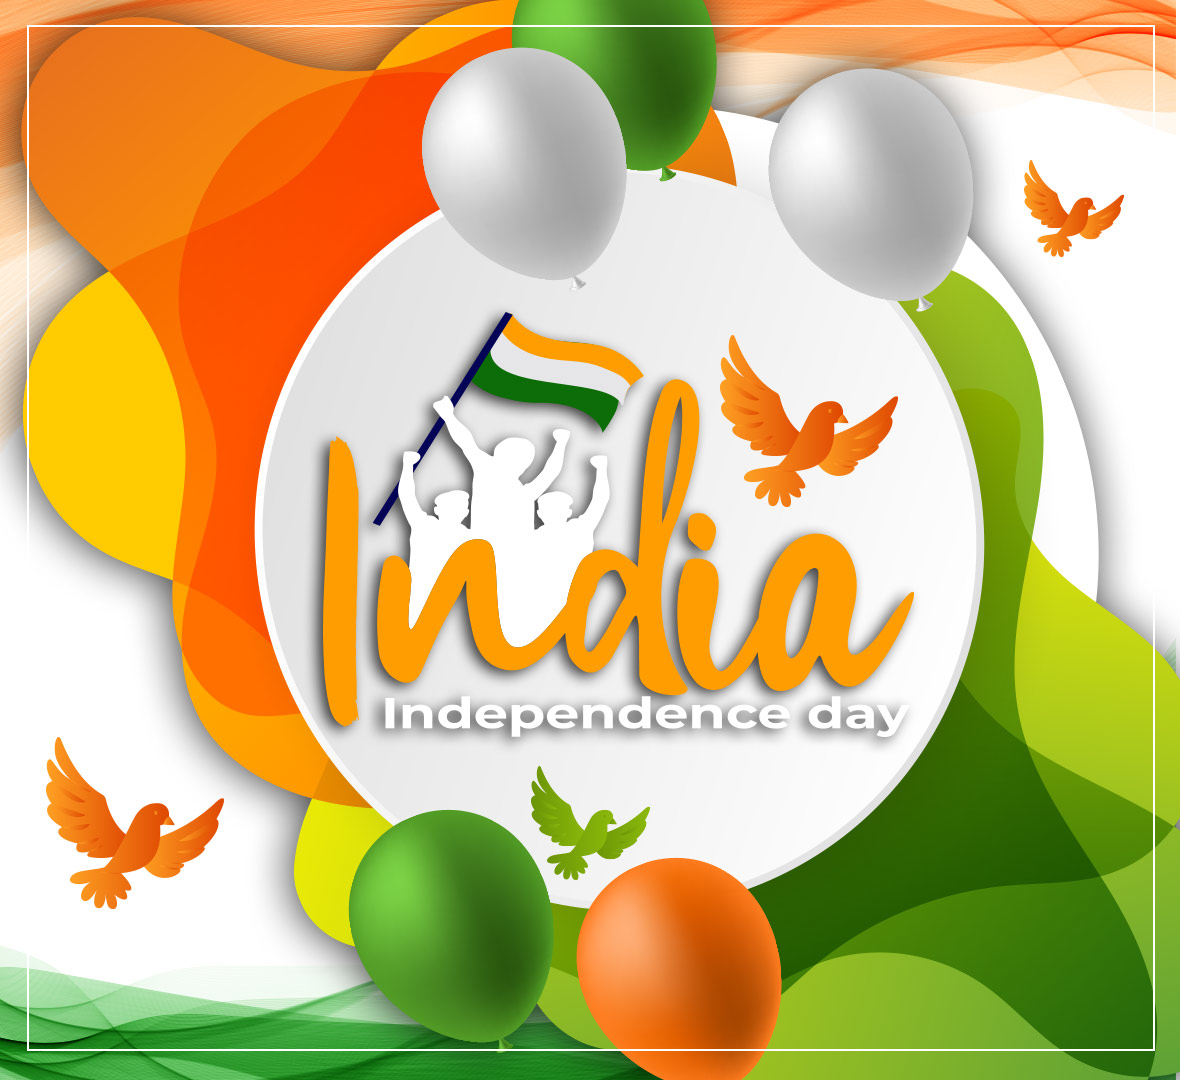 Happy independence day India HD wallpapers, greetings, wishes and status